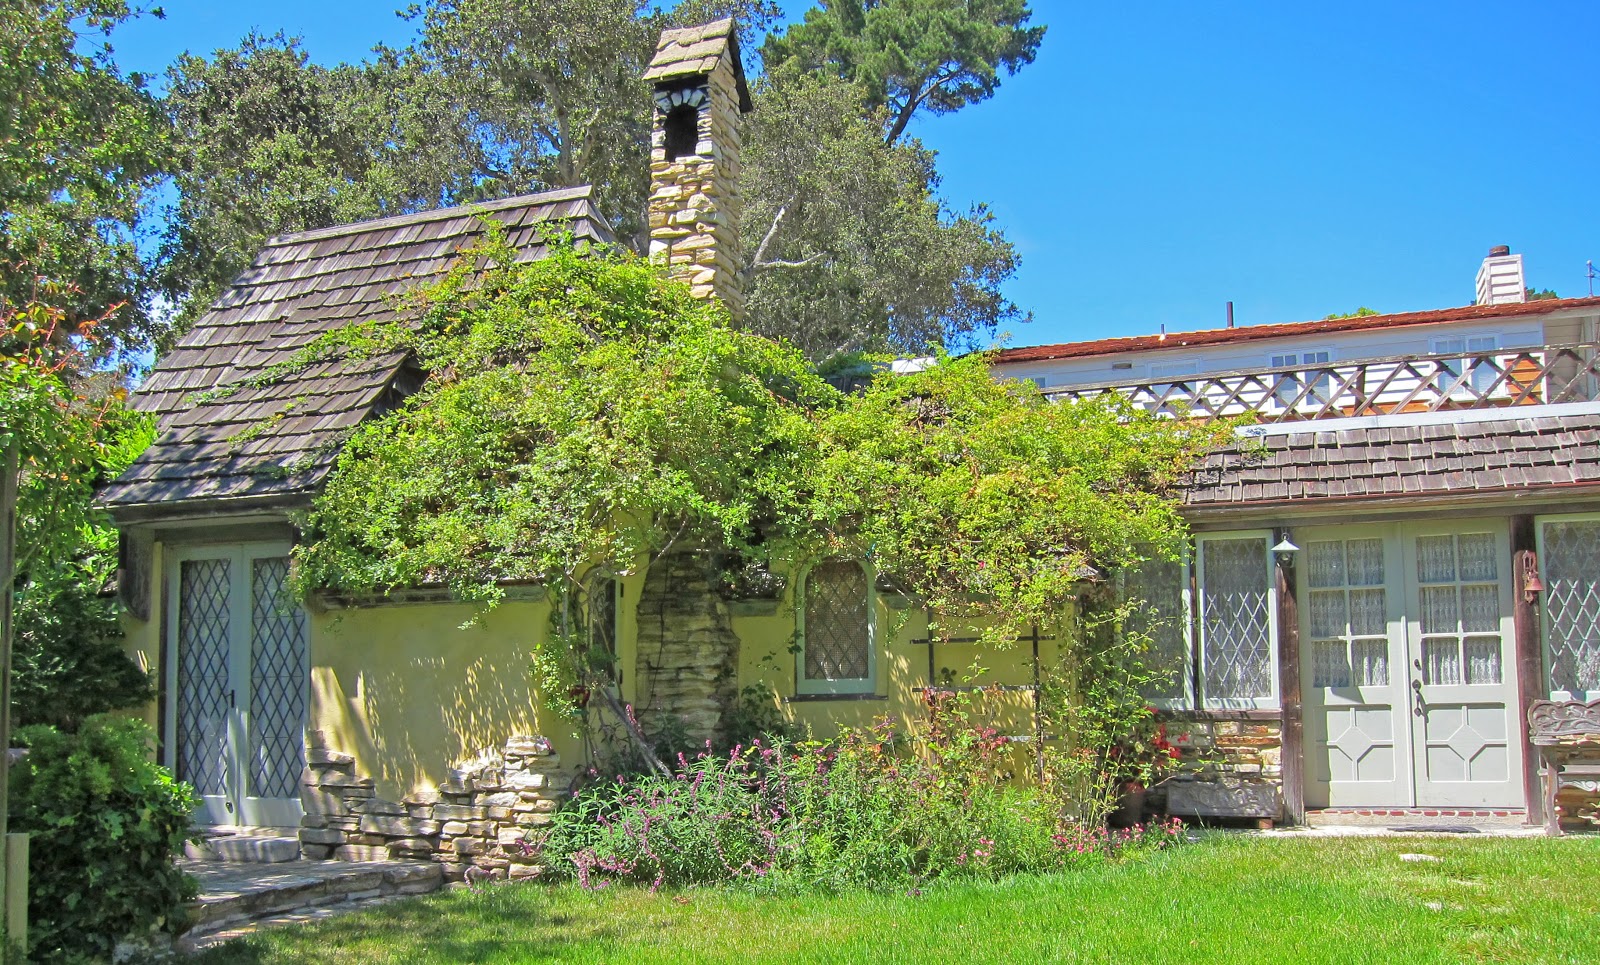 Carmel By The Sea Fairy Tale Cottages Of Hugh Comstock The